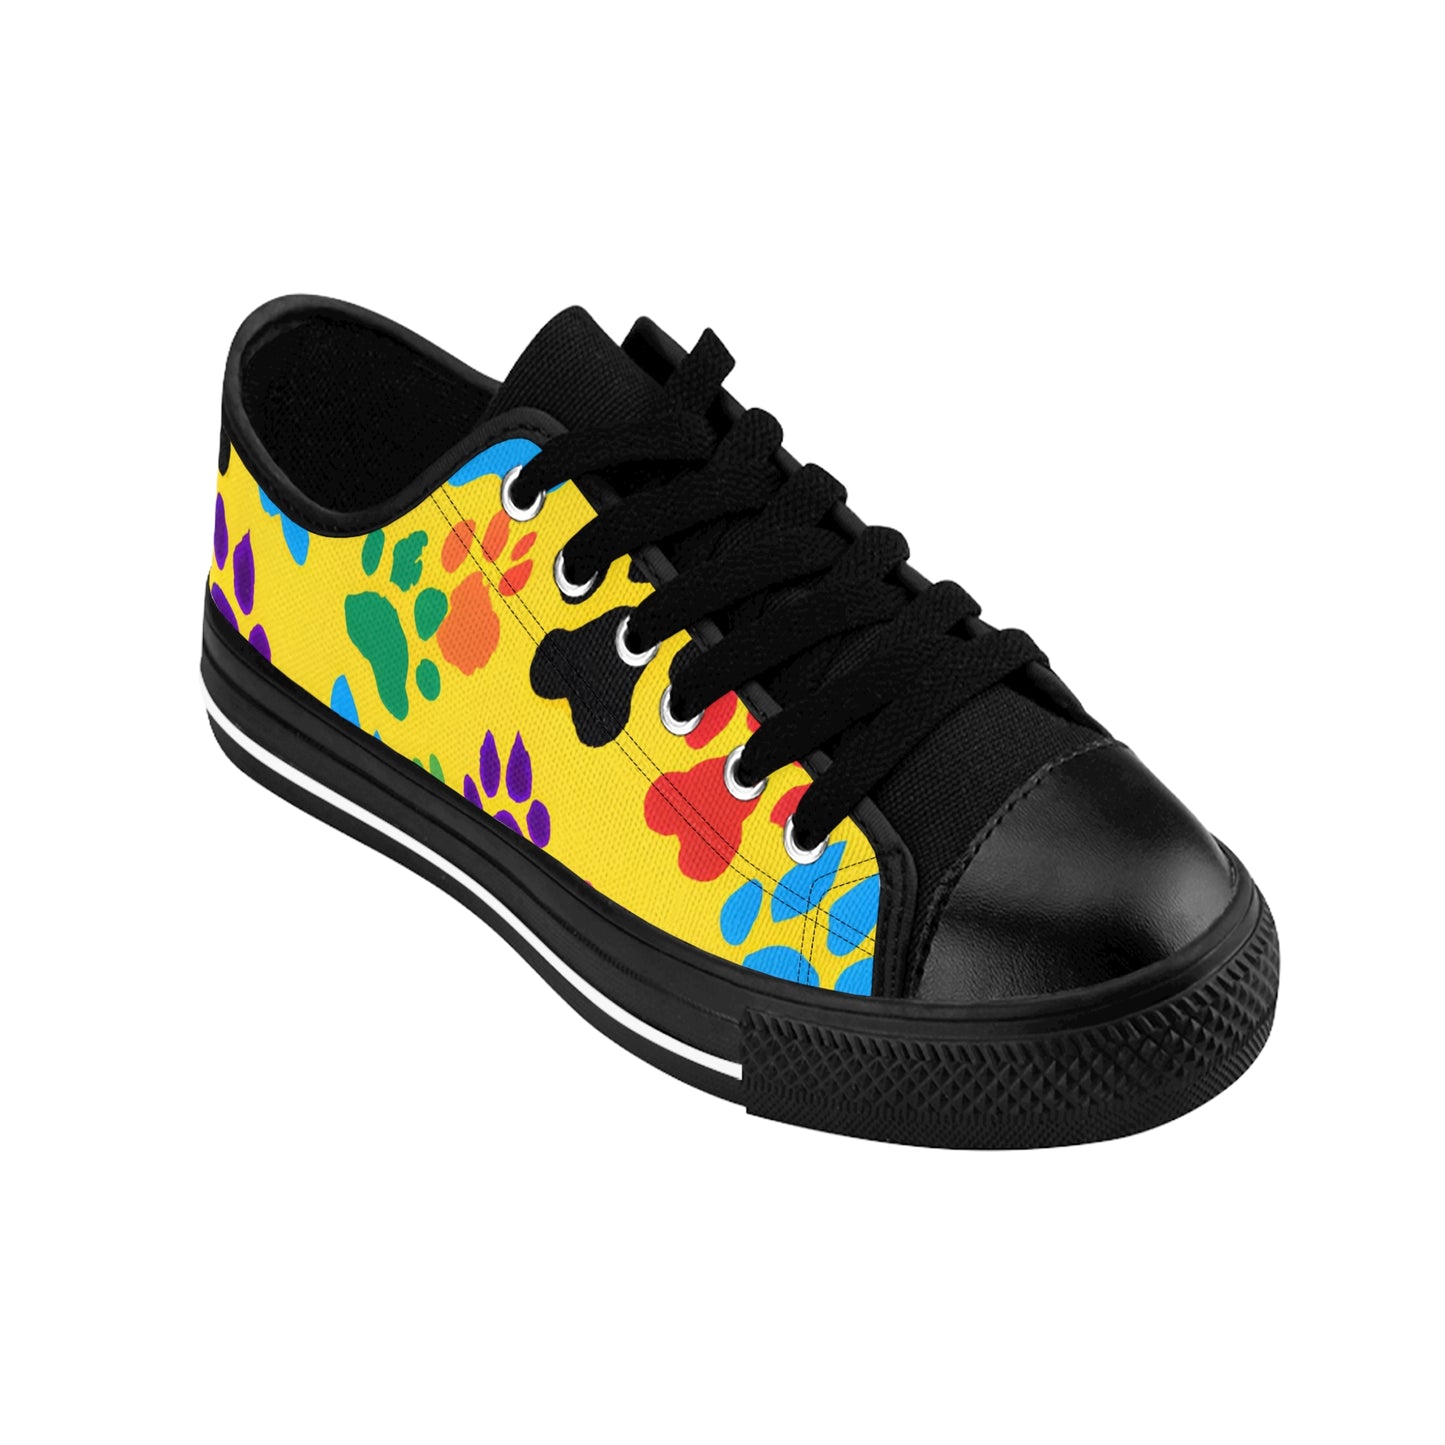 Amelie Chaussures - Paw Print - Low-Top